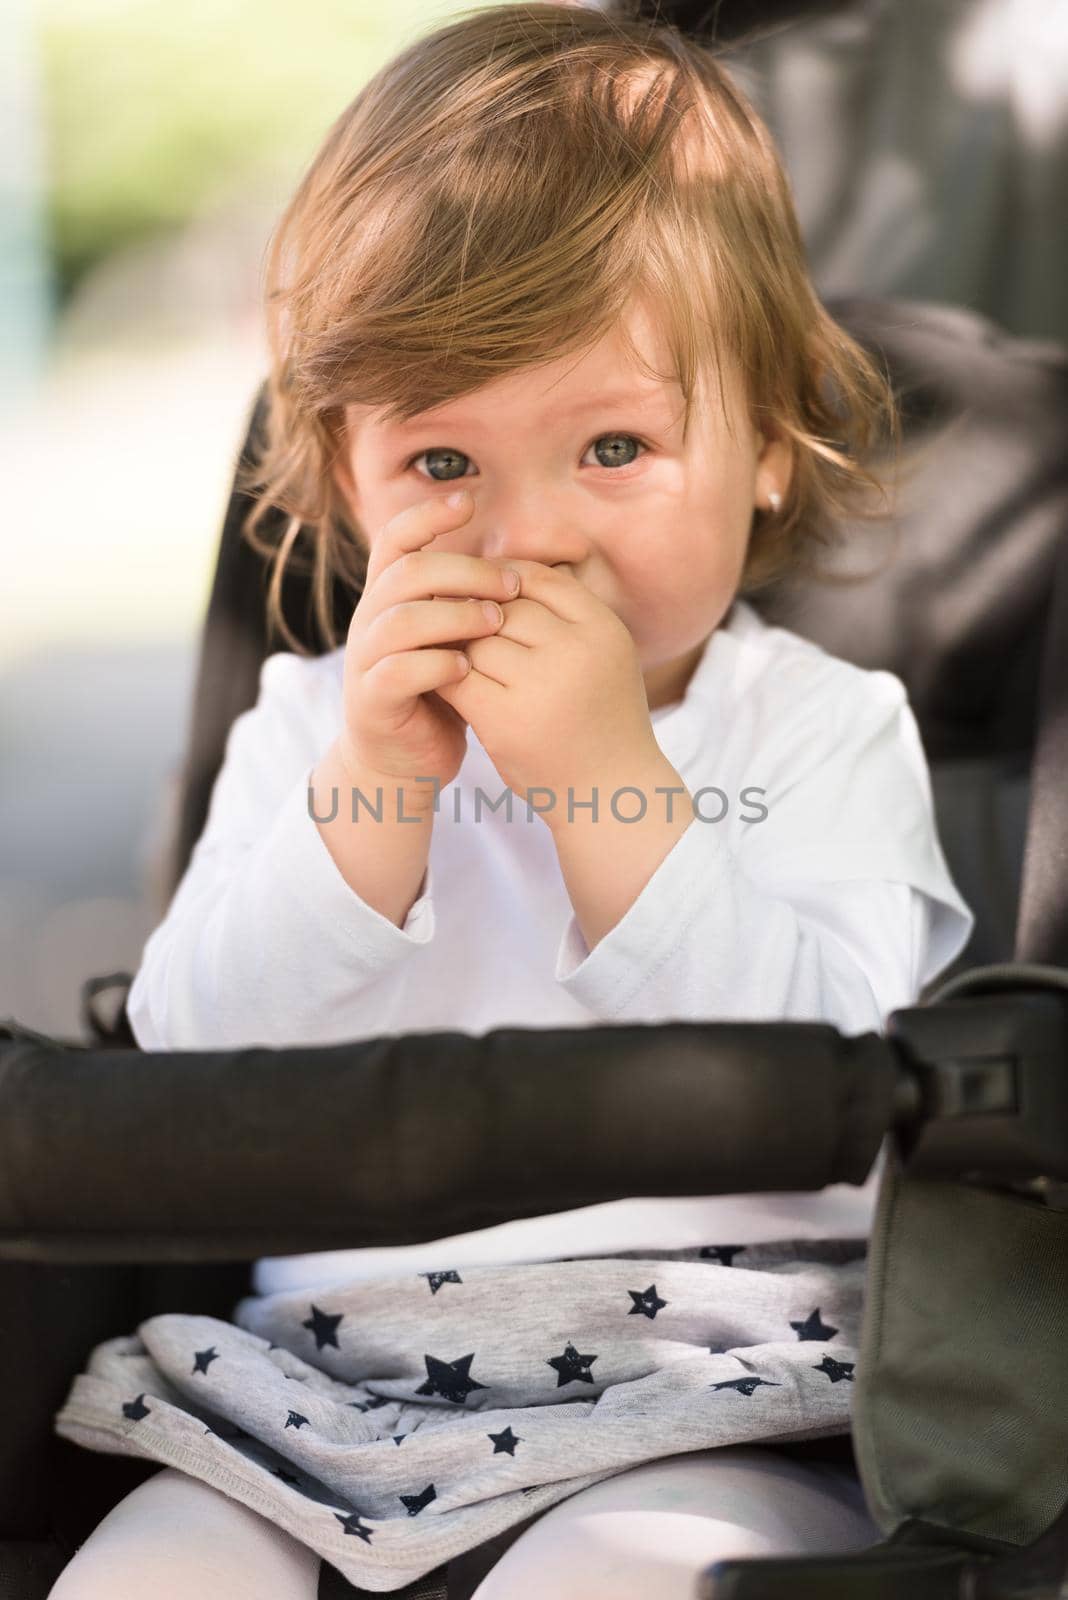 little and very beautiful baby girl sitting in the pram and waiting for mom